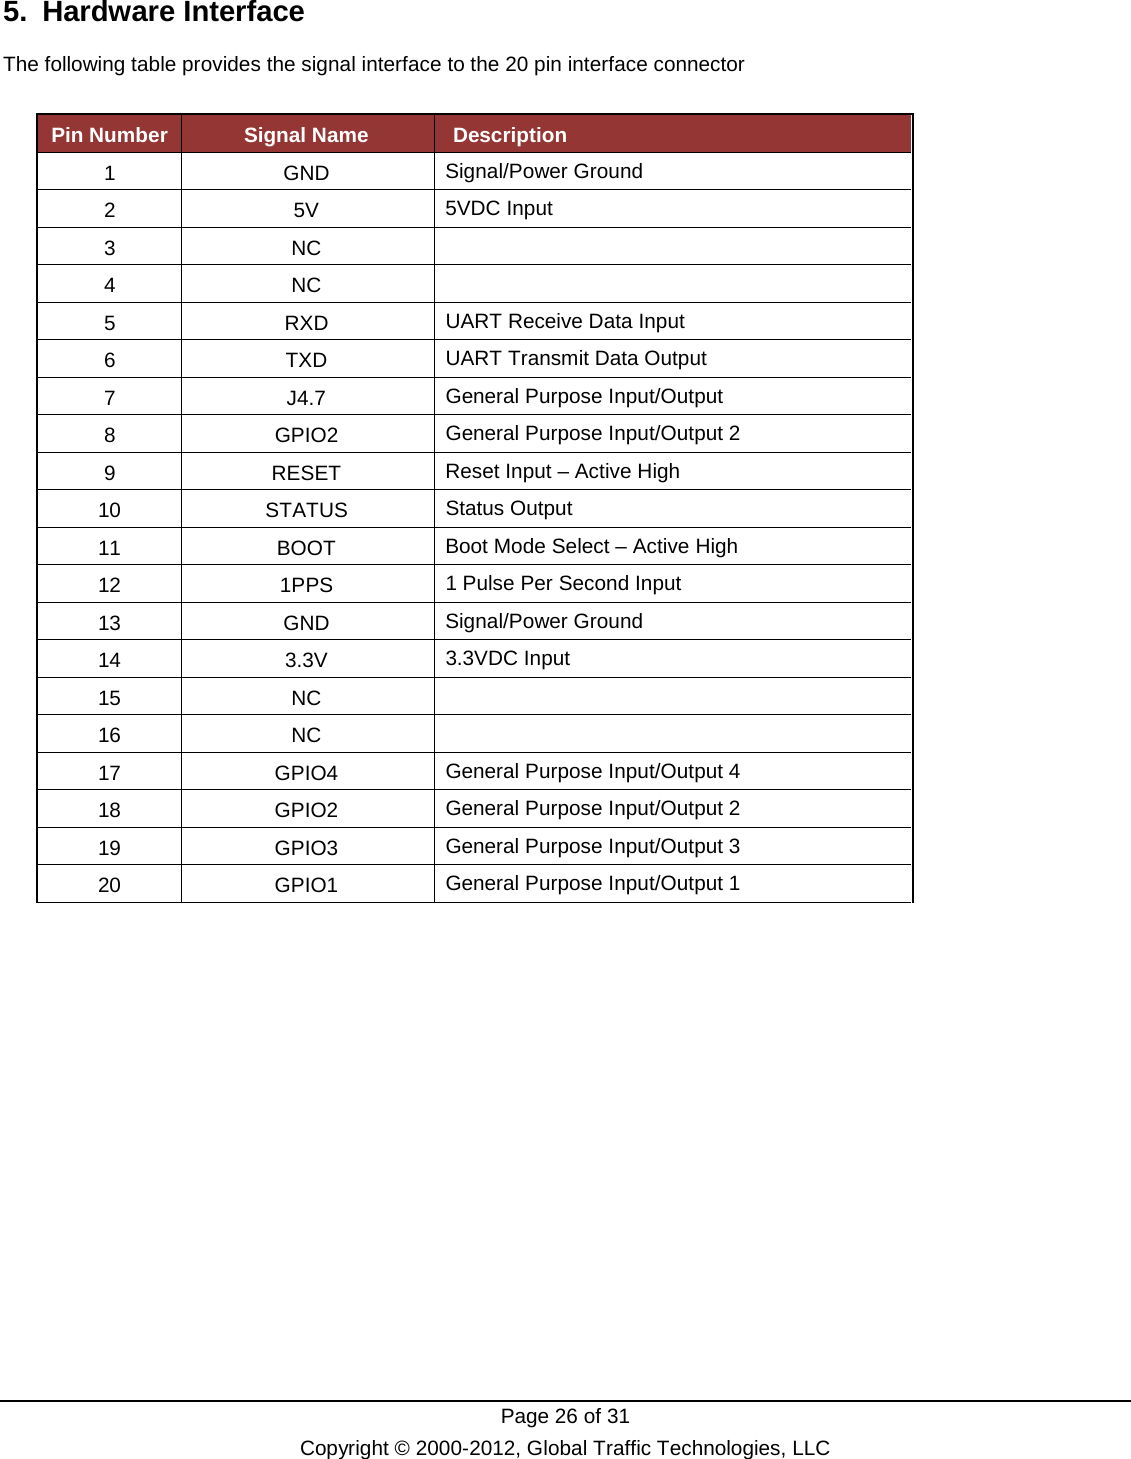  Page 26 of 31 Copyright © 2000-2012, Global Traffic Technologies, LLC 5. Hardware Interface The following table provides the signal interface to the 20 pin interface connector  Pin Number Signal Name Description 1  GND Signal/Power Ground 2  5V 5VDC Input 3  NC  4  NC  5  RXD UART Receive Data Input 6  TXD UART Transmit Data Output 7  J4.7 General Purpose Input/Output 8  GPIO2 General Purpose Input/Output 2 9  RESET Reset Input – Active High 10 STATUS Status Output 11 BOOT Boot Mode Select – Active High 12 1PPS 1 Pulse Per Second Input 13  GND Signal/Power Ground 14  3.3V 3.3VDC Input 15 NC  16 NC  17 GPIO4 General Purpose Input/Output 4 18 GPIO2 General Purpose Input/Output 2 19 GPIO3 General Purpose Input/Output 3 20 GPIO1 General Purpose Input/Output 1 